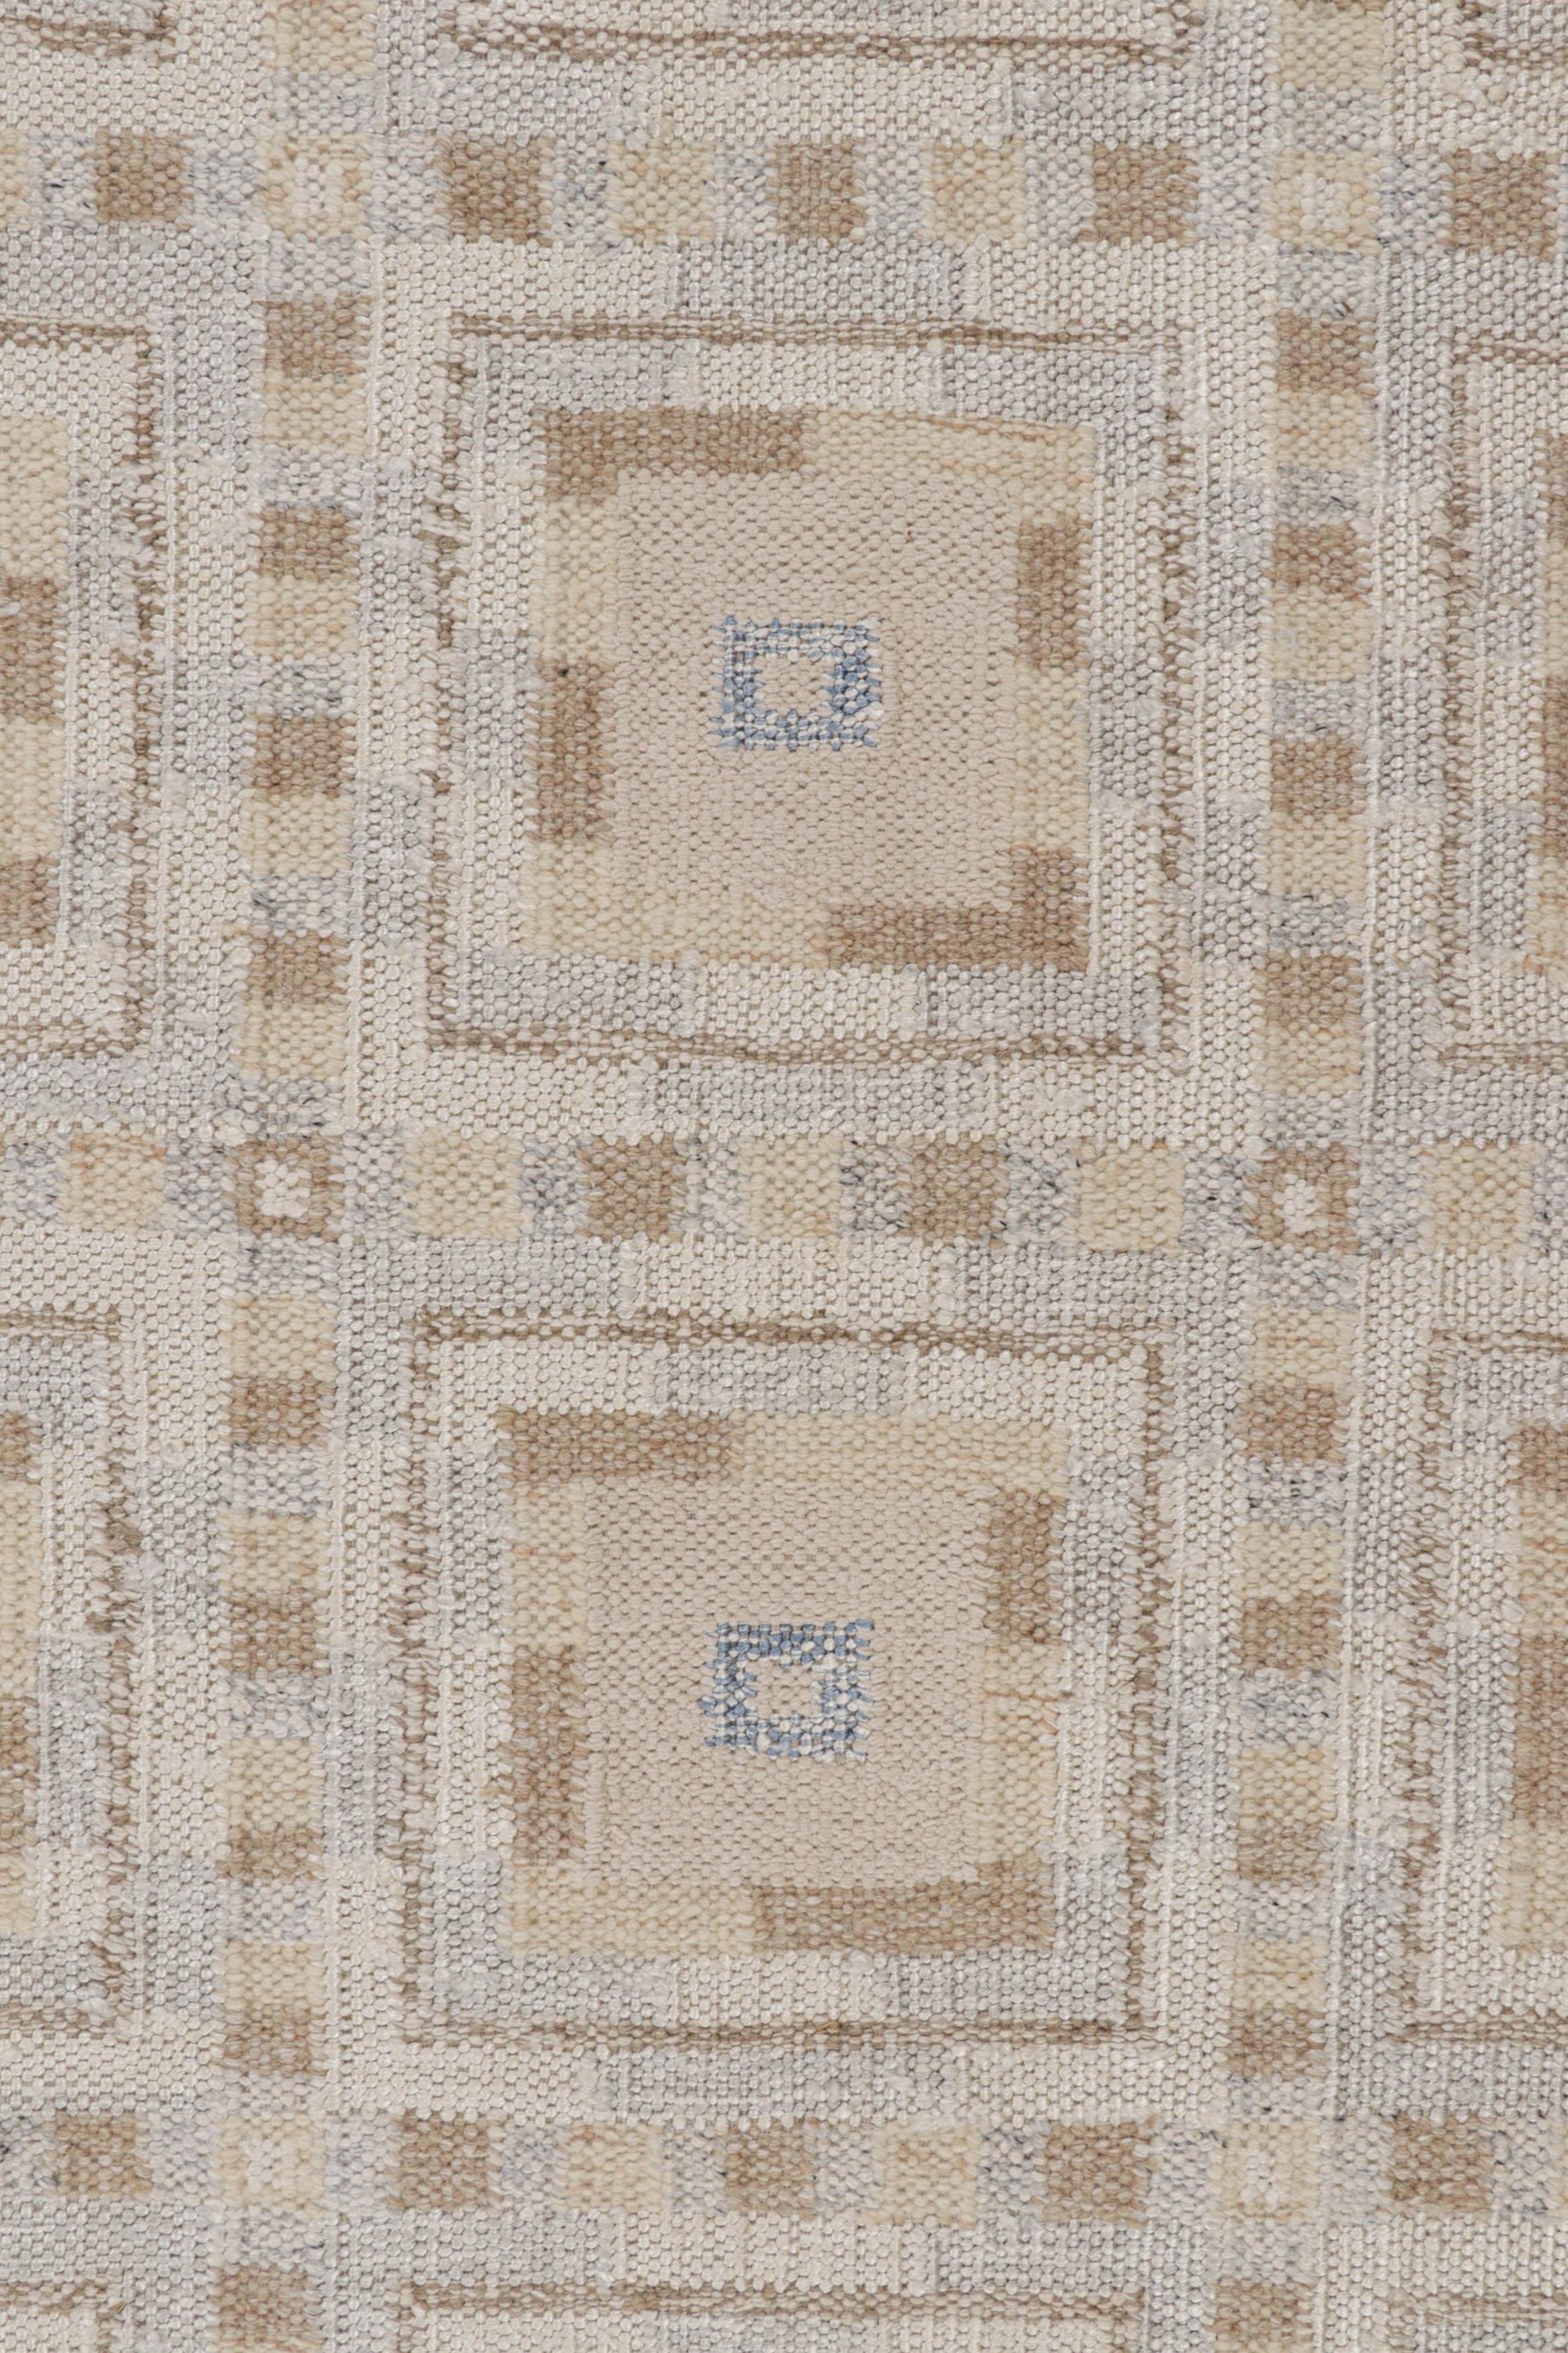 Modern Rug & Kilim’s Scandinavian Rug with White and Beige-Brown Geometric Patterns For Sale